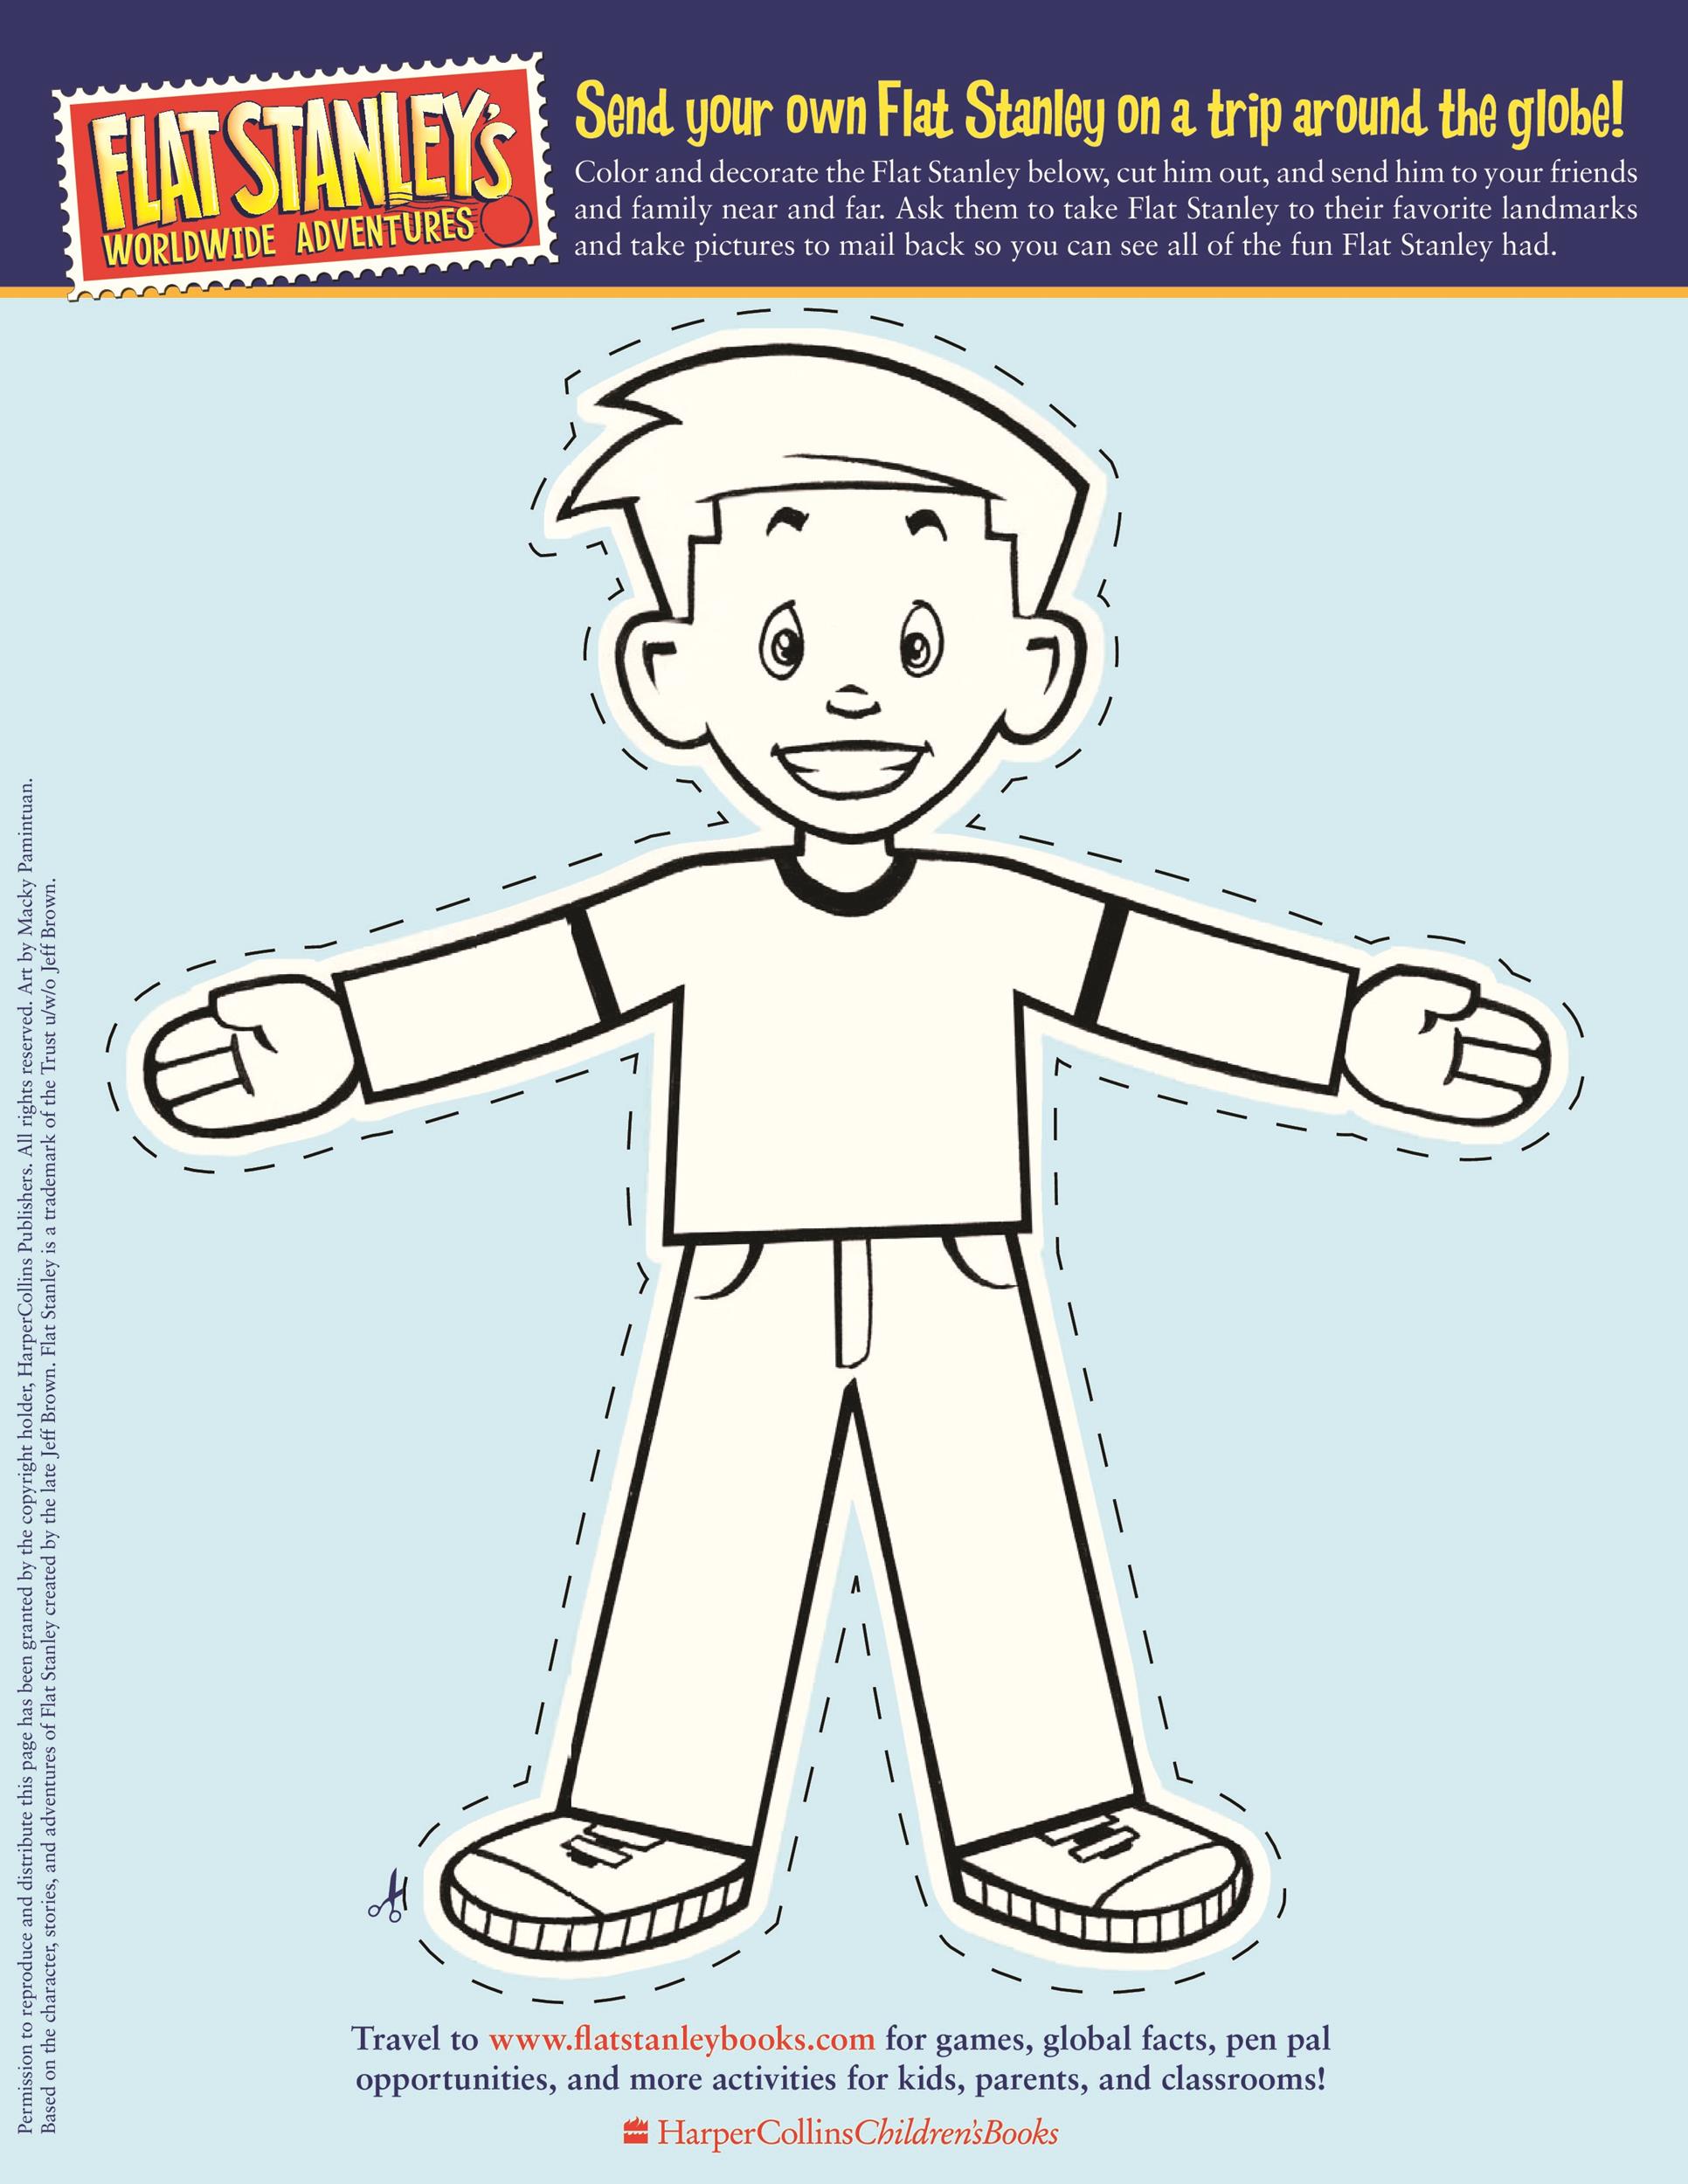 37 Flat Stanley Templates & Letter Examples ᐅ TemplateLab